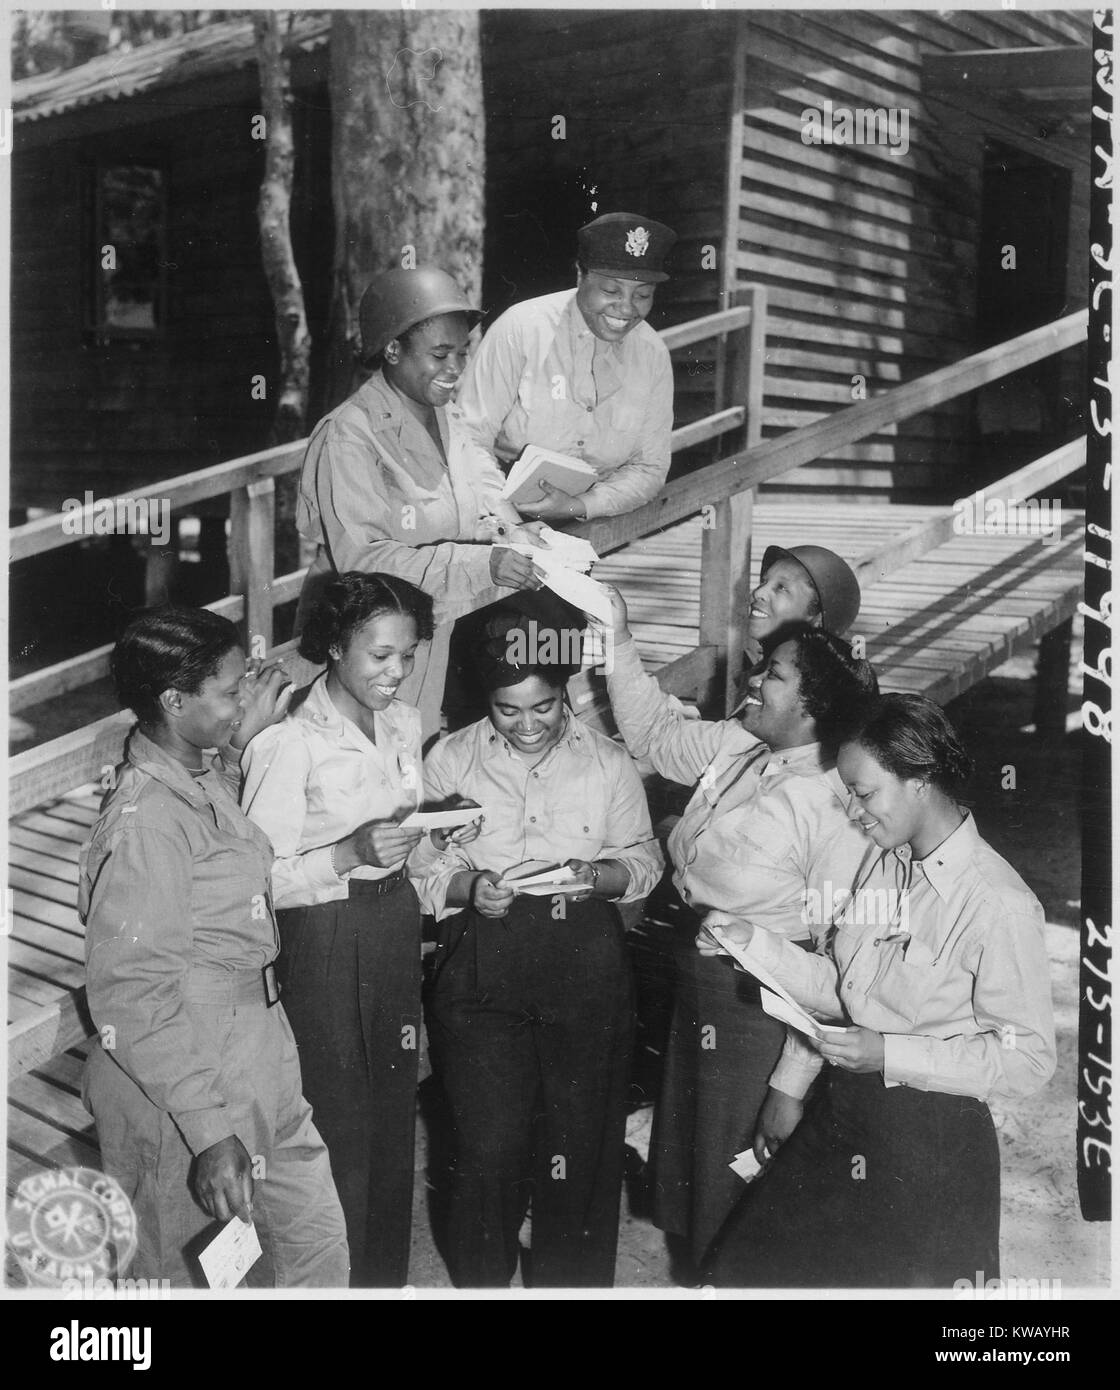 A contingent of fifteen nurses arrive in the Southwest Pacific area after receiving their first batch of home mail at their station at the 268th Station Hospital in Australia, November 29, 1943. Image courtesy National Archives. Stock Photo